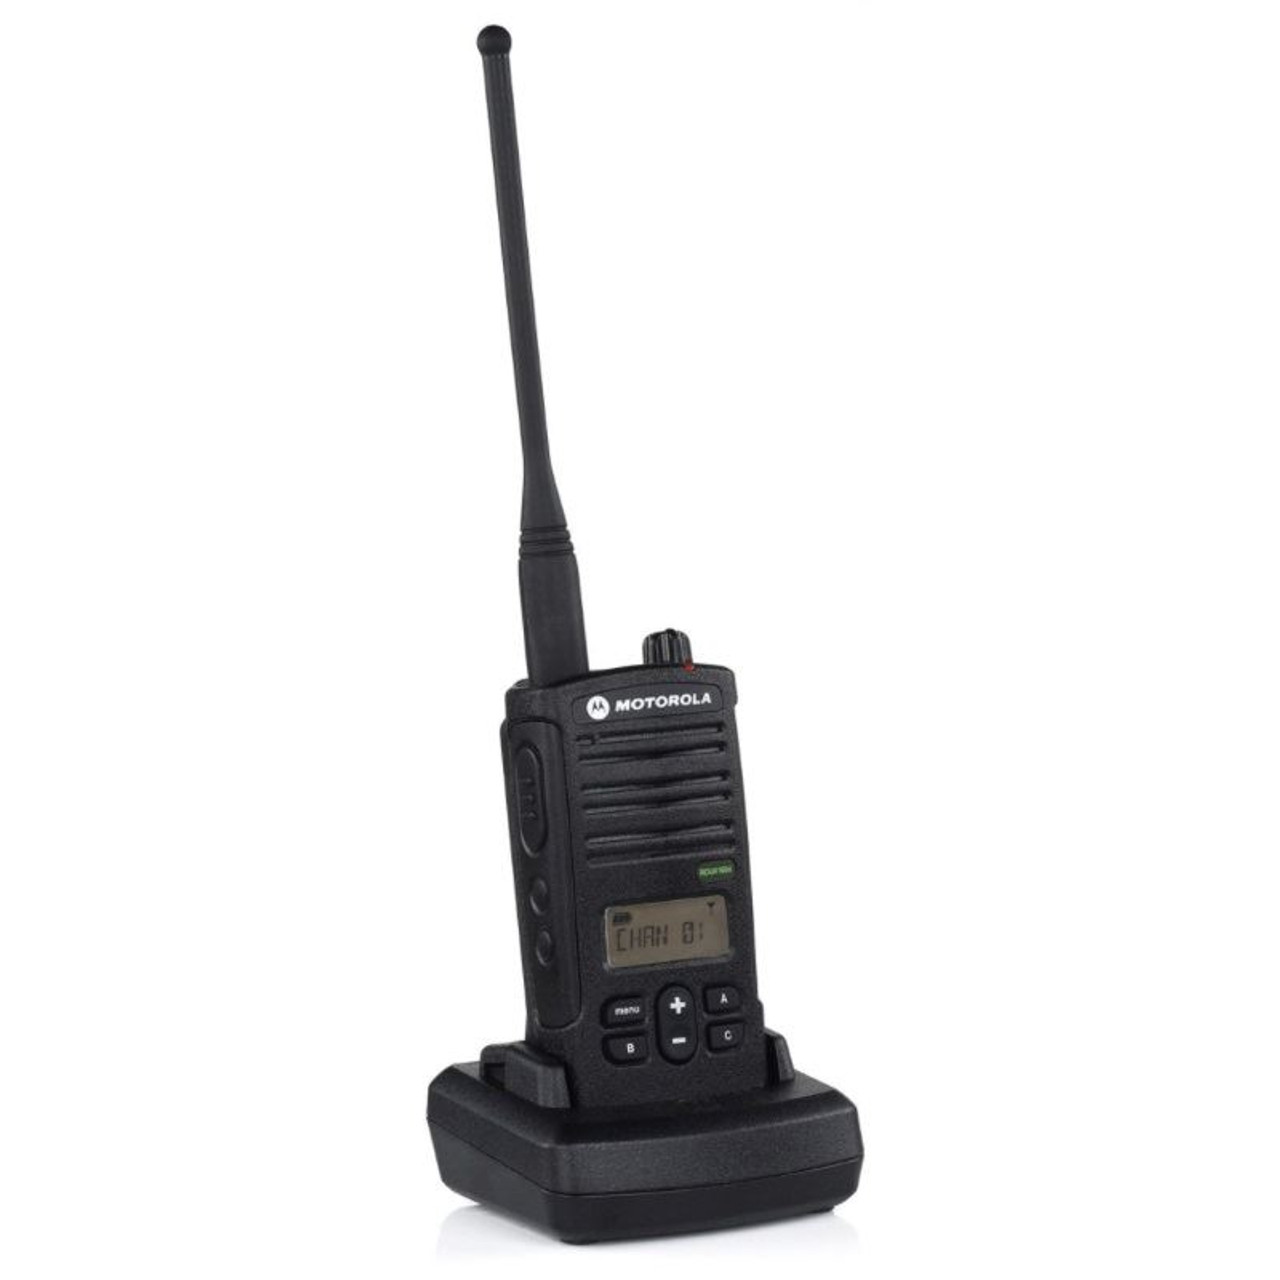 Motorola RDU4160D has a an easy to read Display and is Watts. This radios  is a workhorse and gets the job done. Perfect for construction sites,  schools, large warehouses and malls.